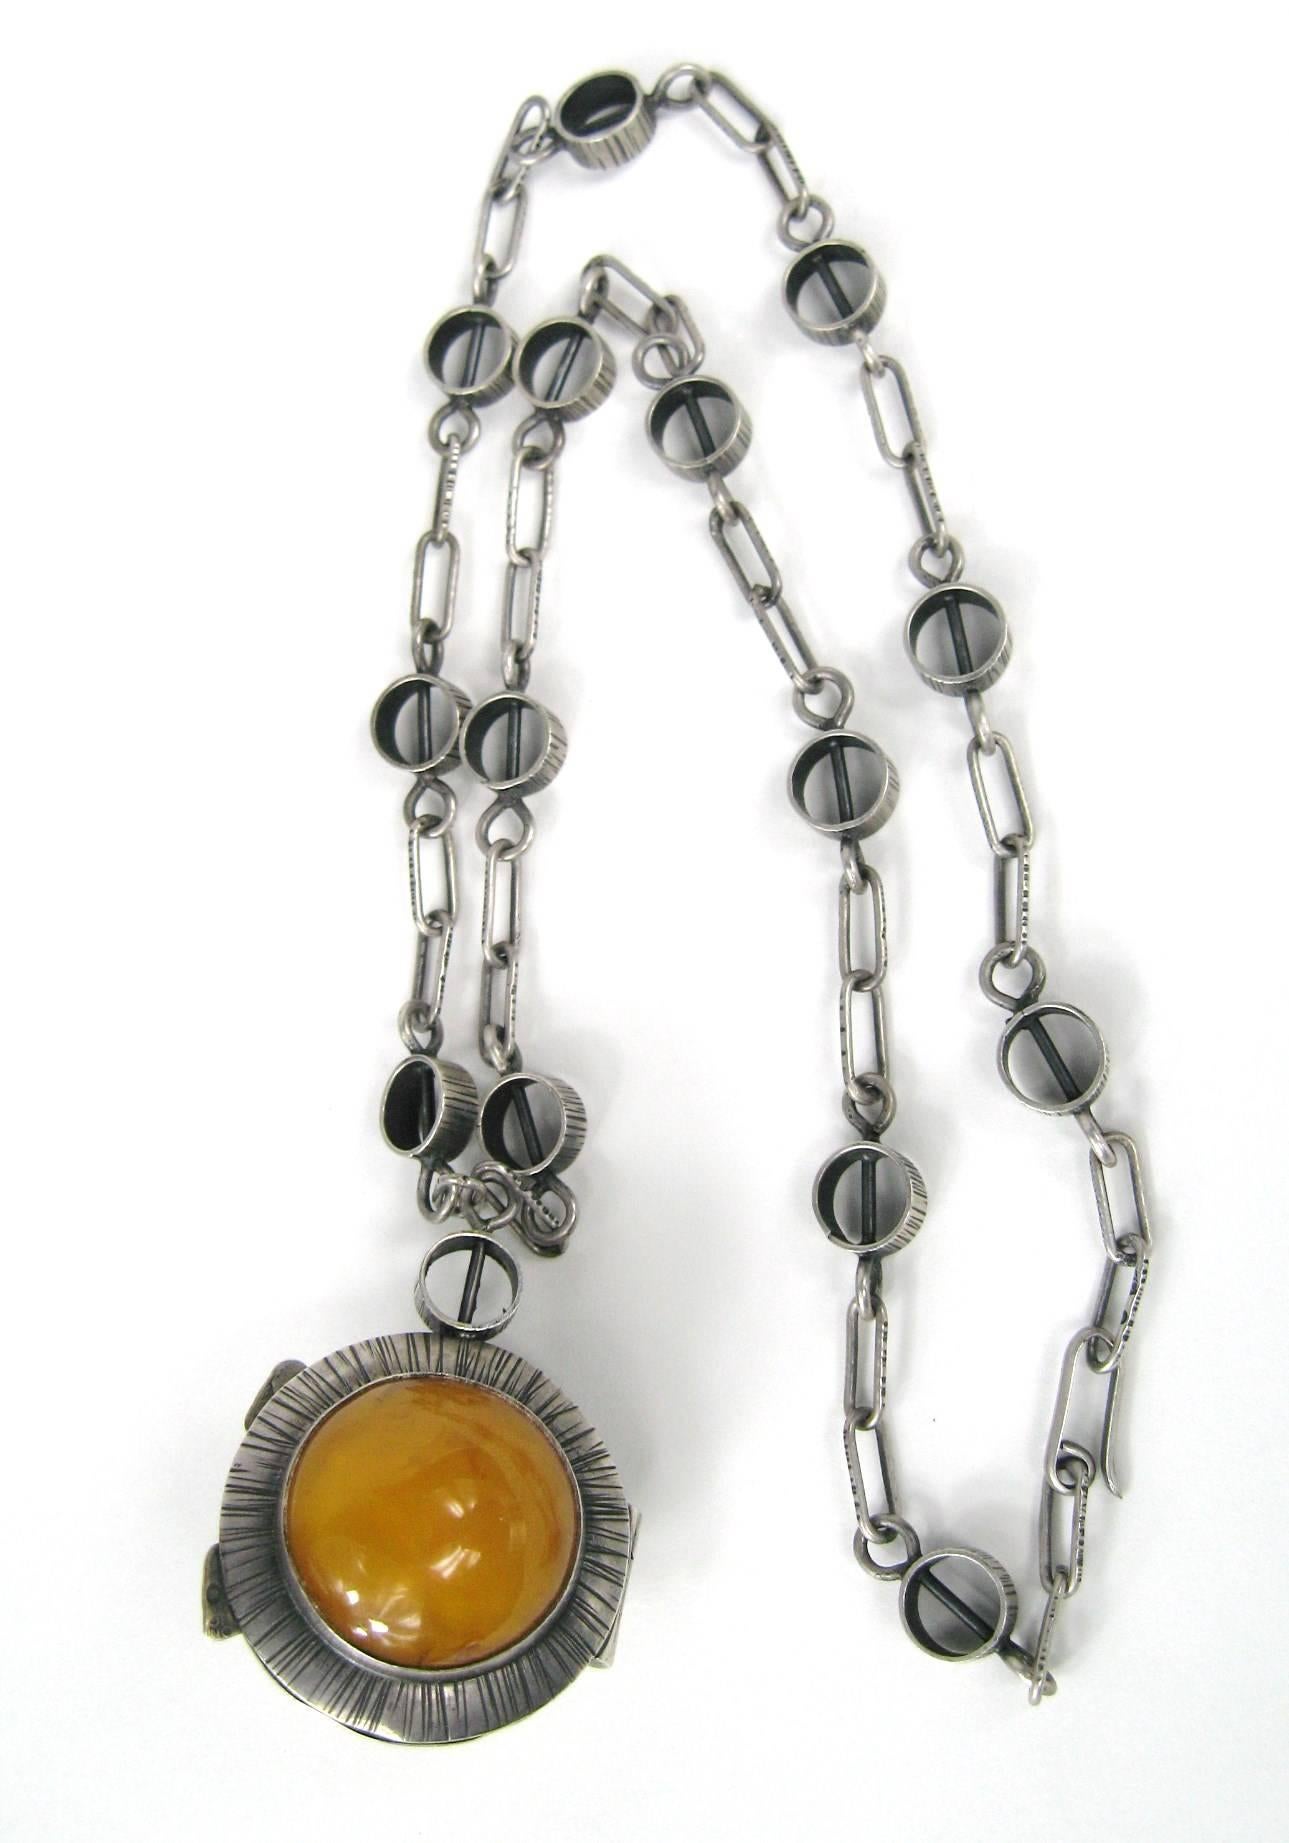 This is amazing, double sided amber locket. It is Hallmarked on the lock on the locket. Has a Link chain. The Locket in 1.49 inches in diameter. 24.5 inches  end to end on link chain. This is out of a massive collection of Hopi, Zuni, Navajo,